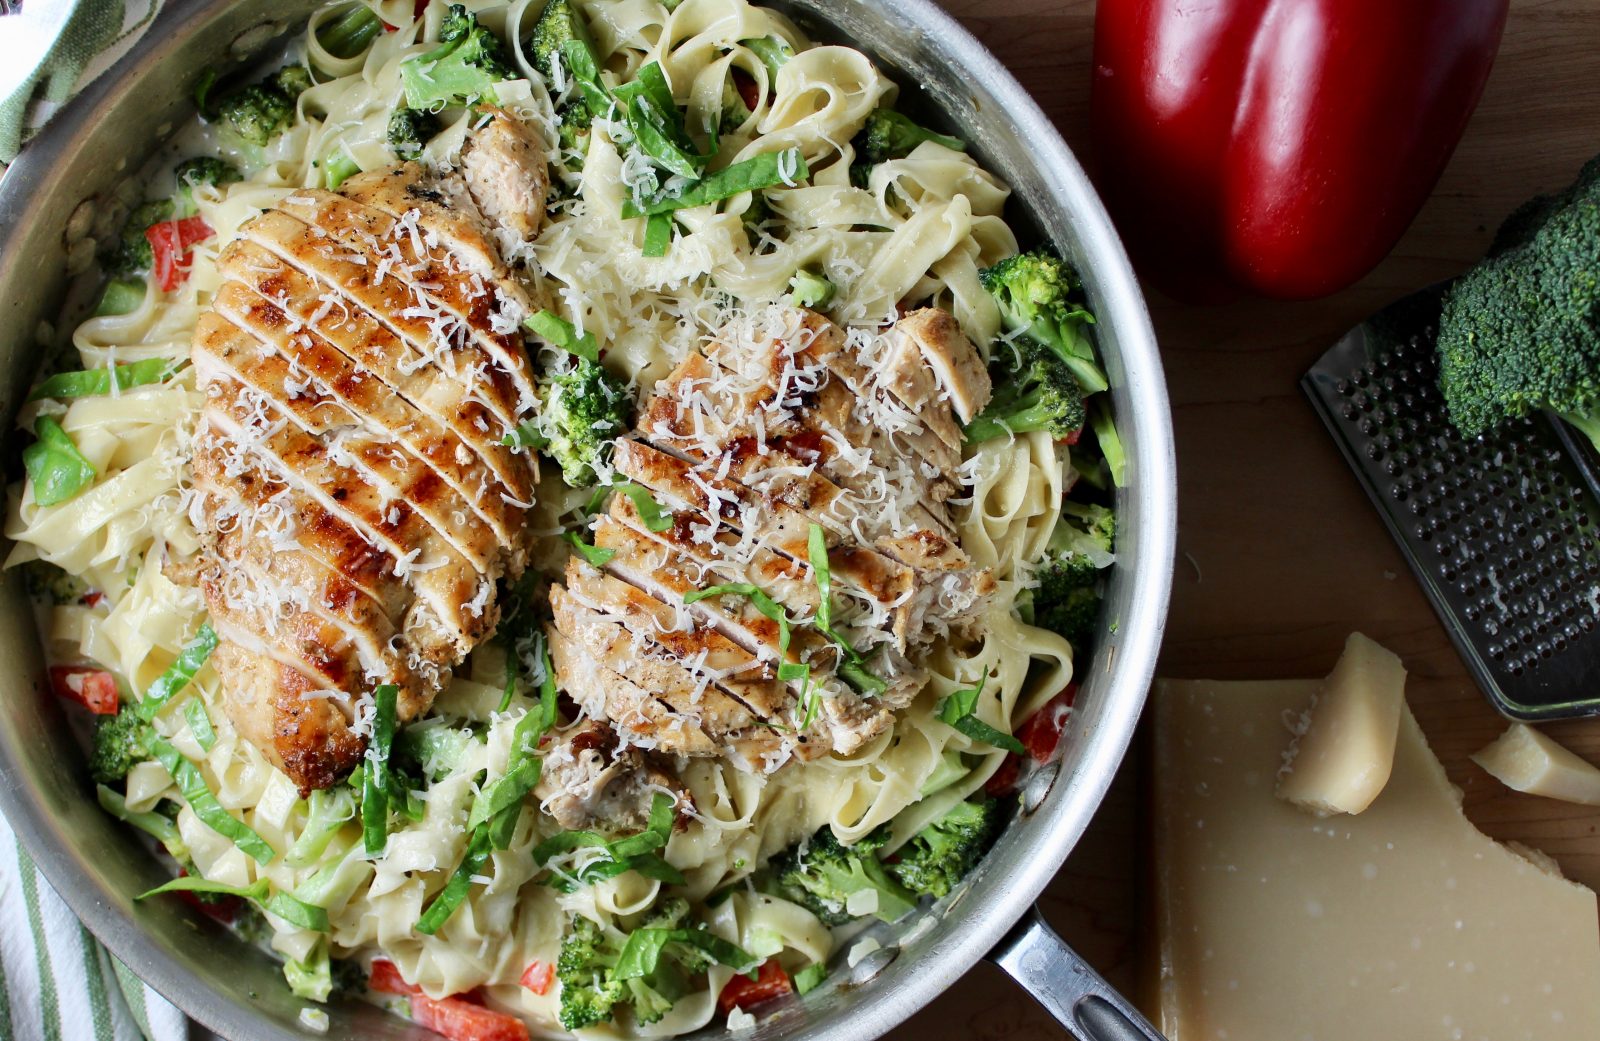 All-Clad Large Skillet filled with fettuccini in Parmesan cream sauce, with broccoli, red pepper and topped with sliced grilled chicken